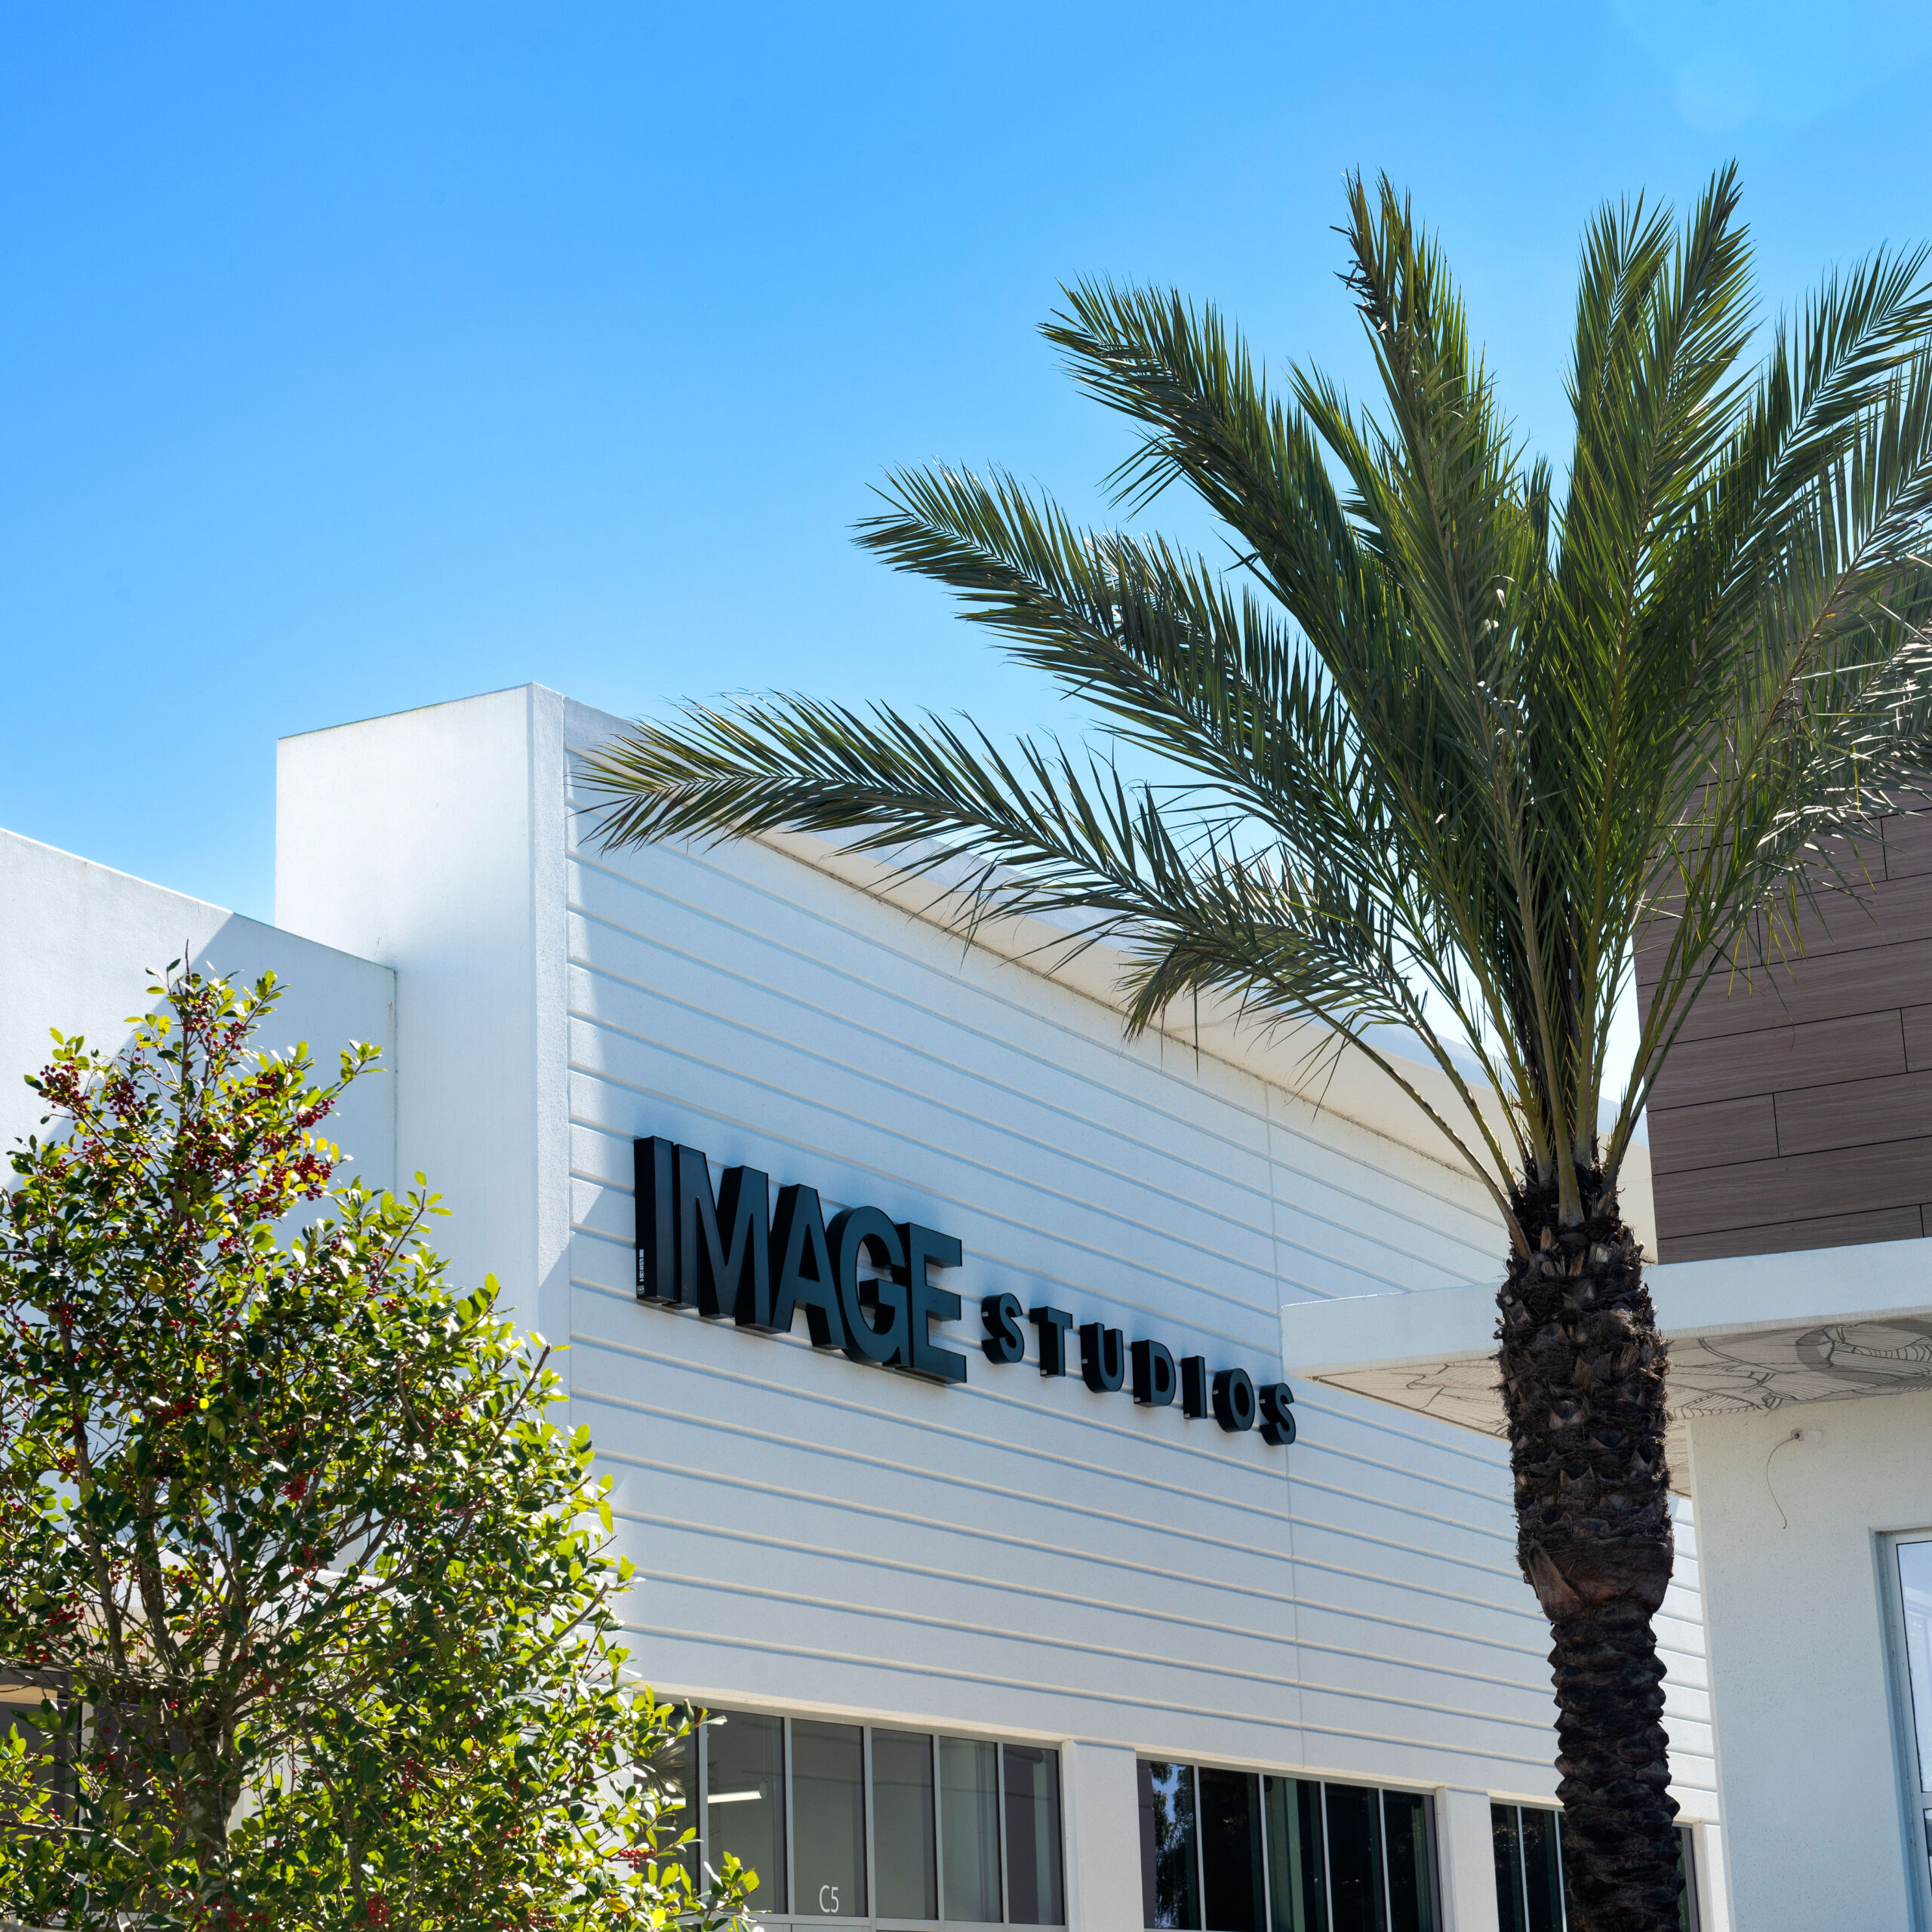 Growth of IMAGE Studios in Florida: Revolutionizing the Salon Industry